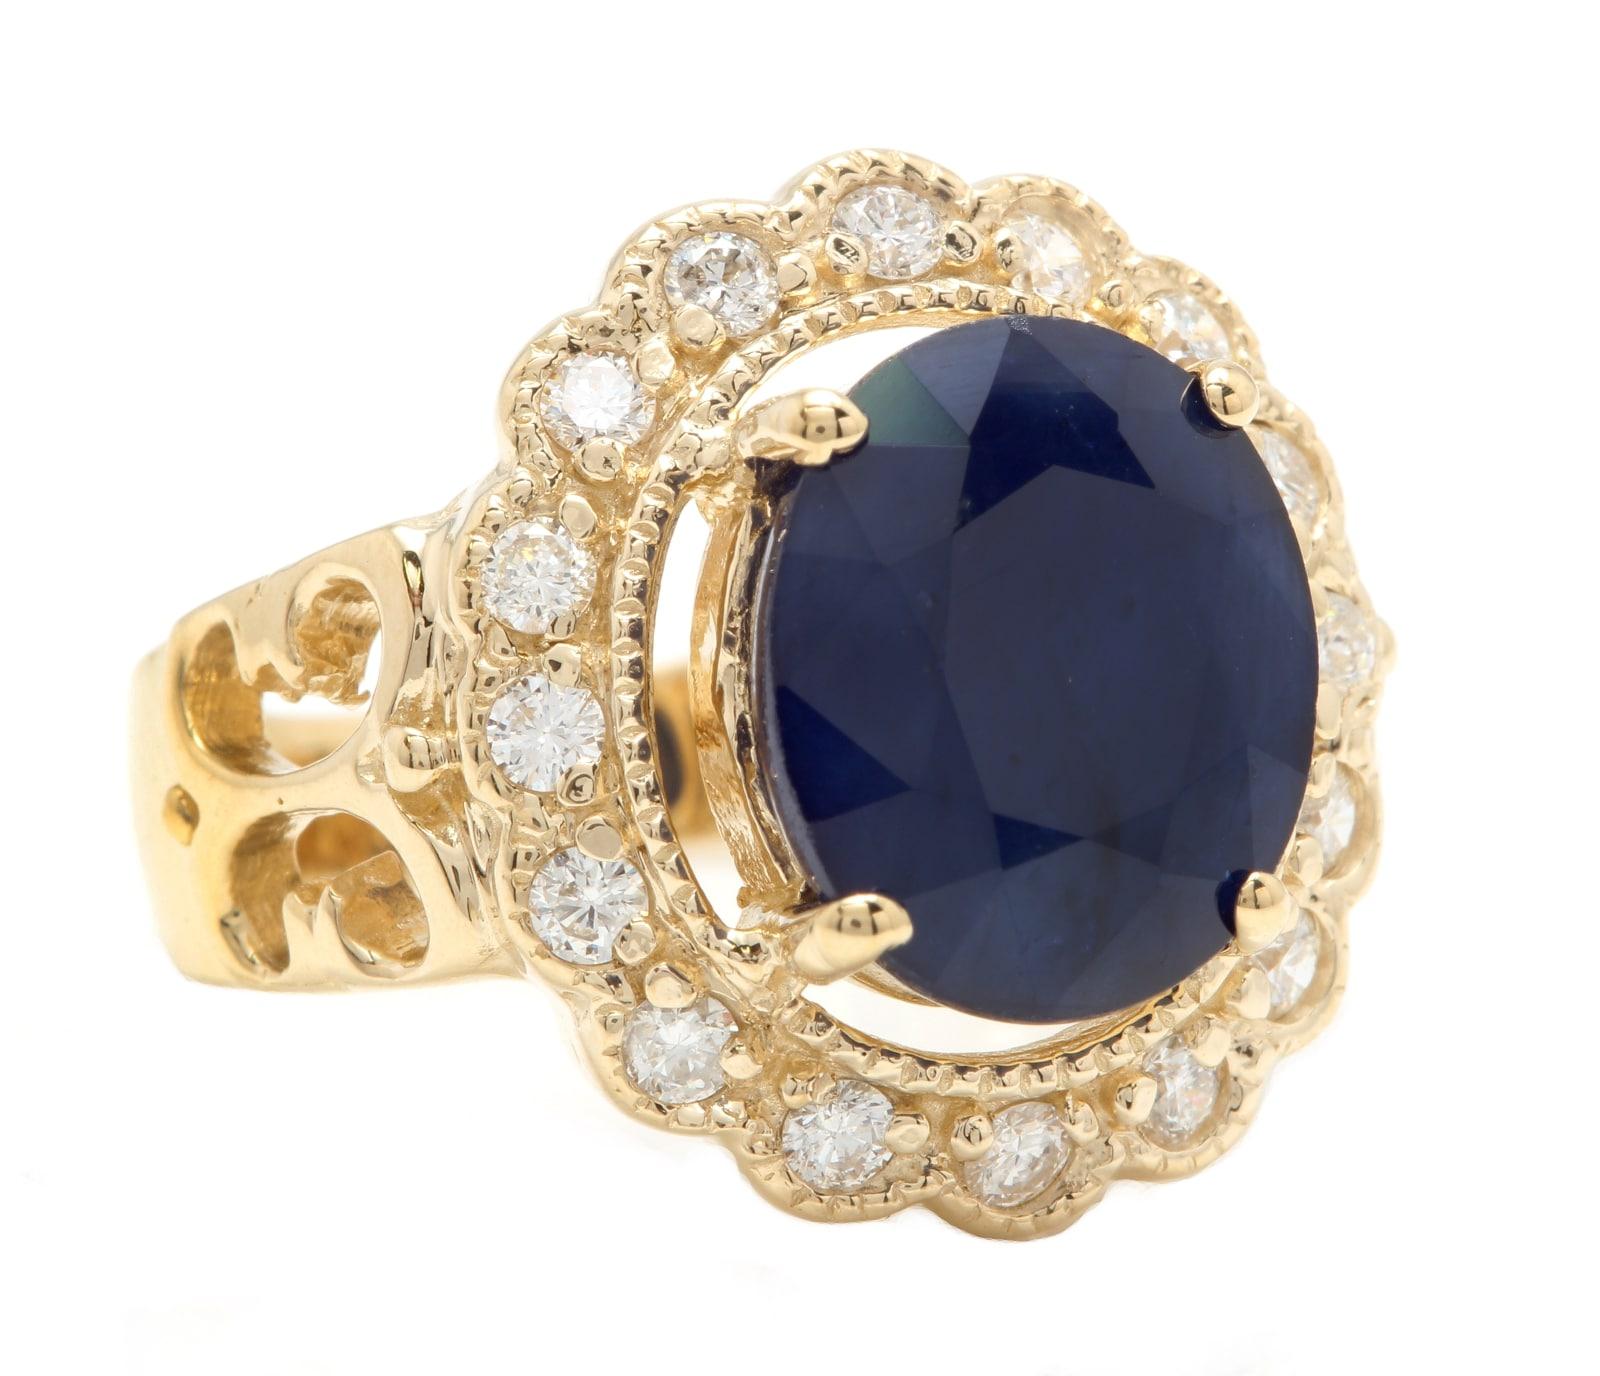 7.50 Carats Exquisite Natural Blue Sapphire and Diamond 14K Solid Yellow Gold Ring

Suggested Replacement Value $6,000.00

Total Natural Blue Sapphire Weights: Approx. 7.00 Carats 

Sapphire Measures: Approx. 12.00 x 10.00mm

Sapphire Treatment: